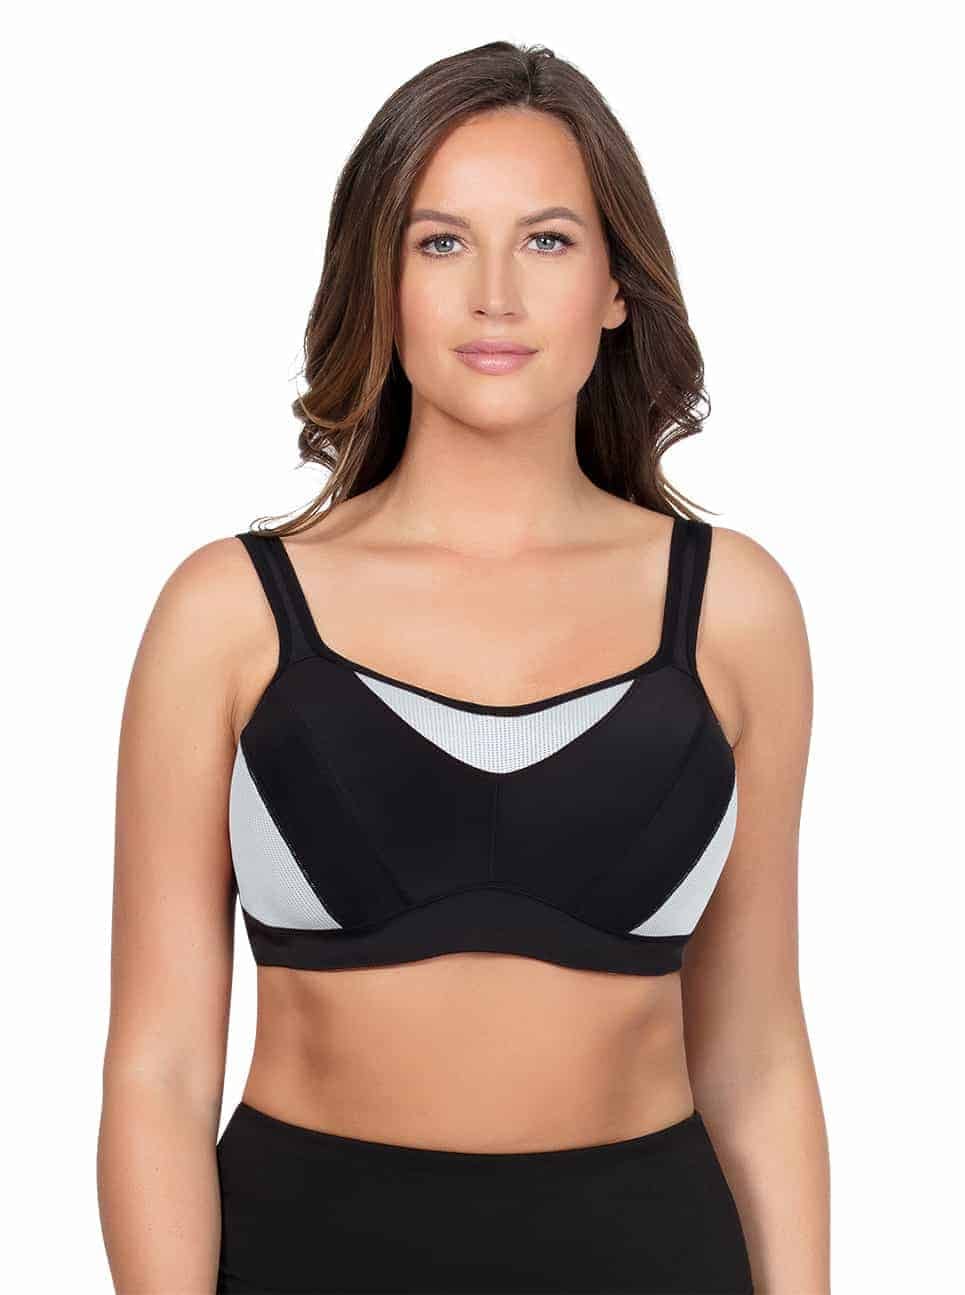 Lululemon Tata tamer sports bra Size undefined - $16 - From Holly